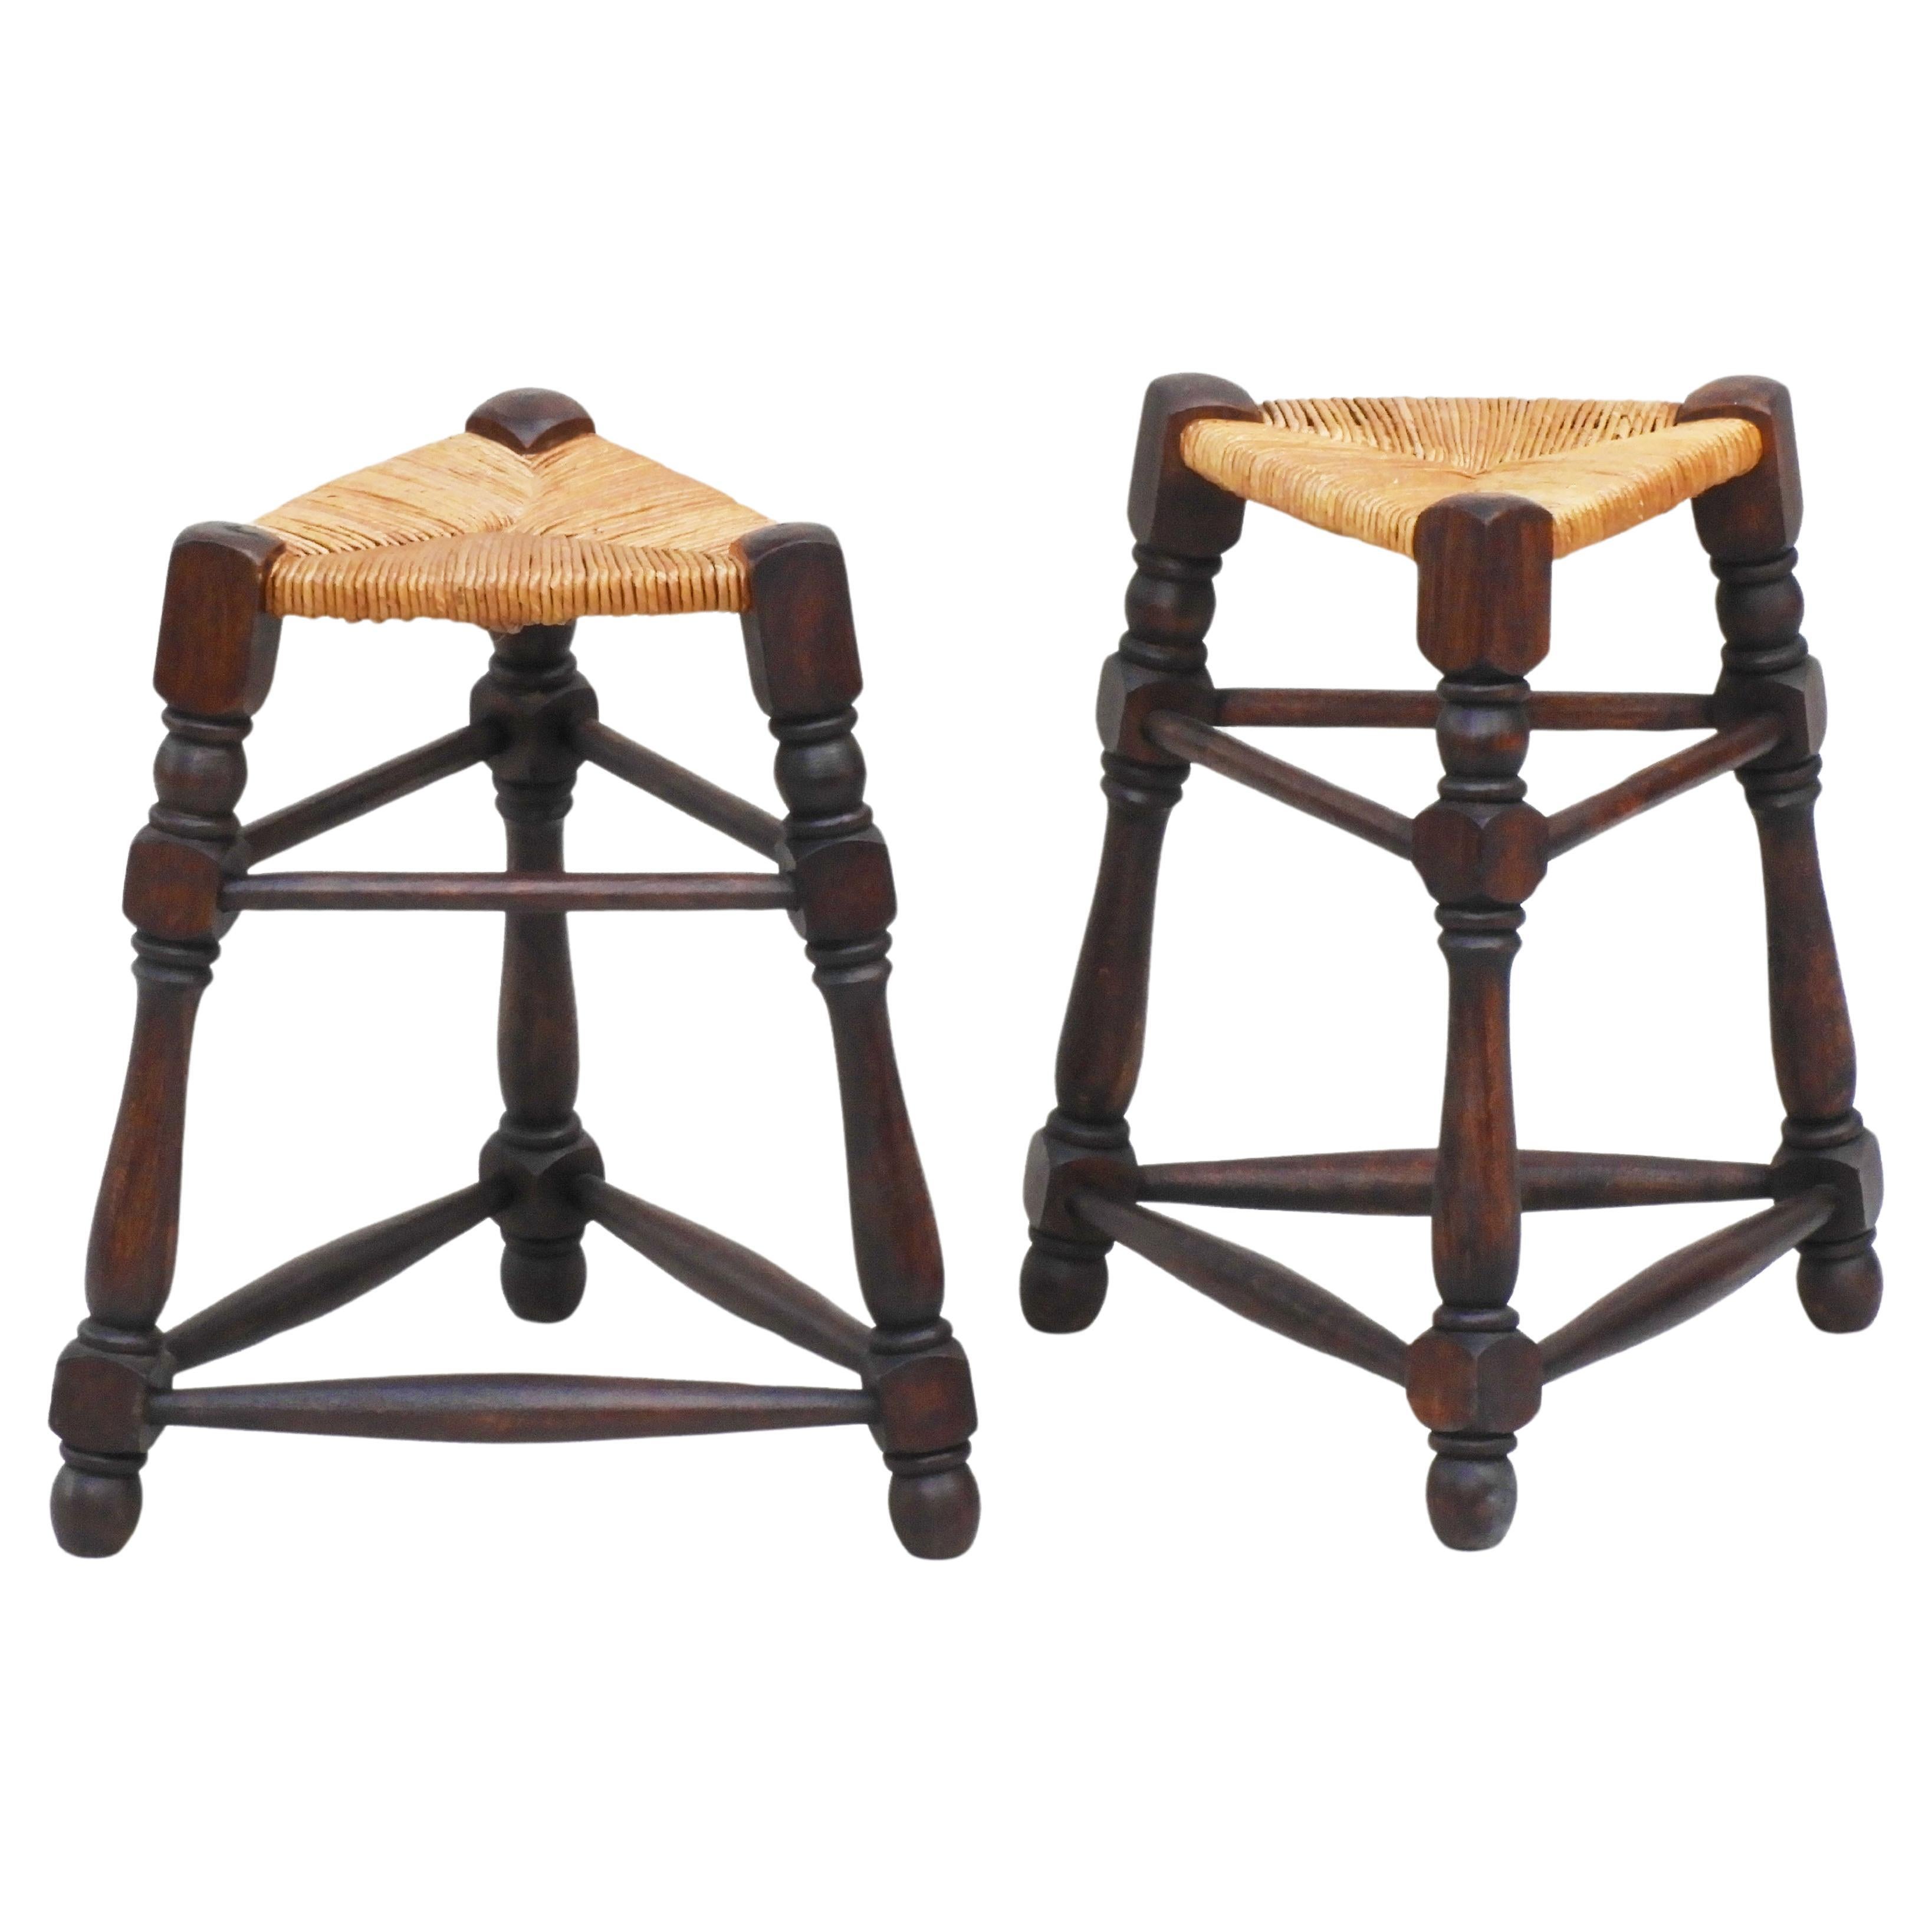 Pair of Provincial French Triangular Rush Seat Tabouret Stools c1950s France